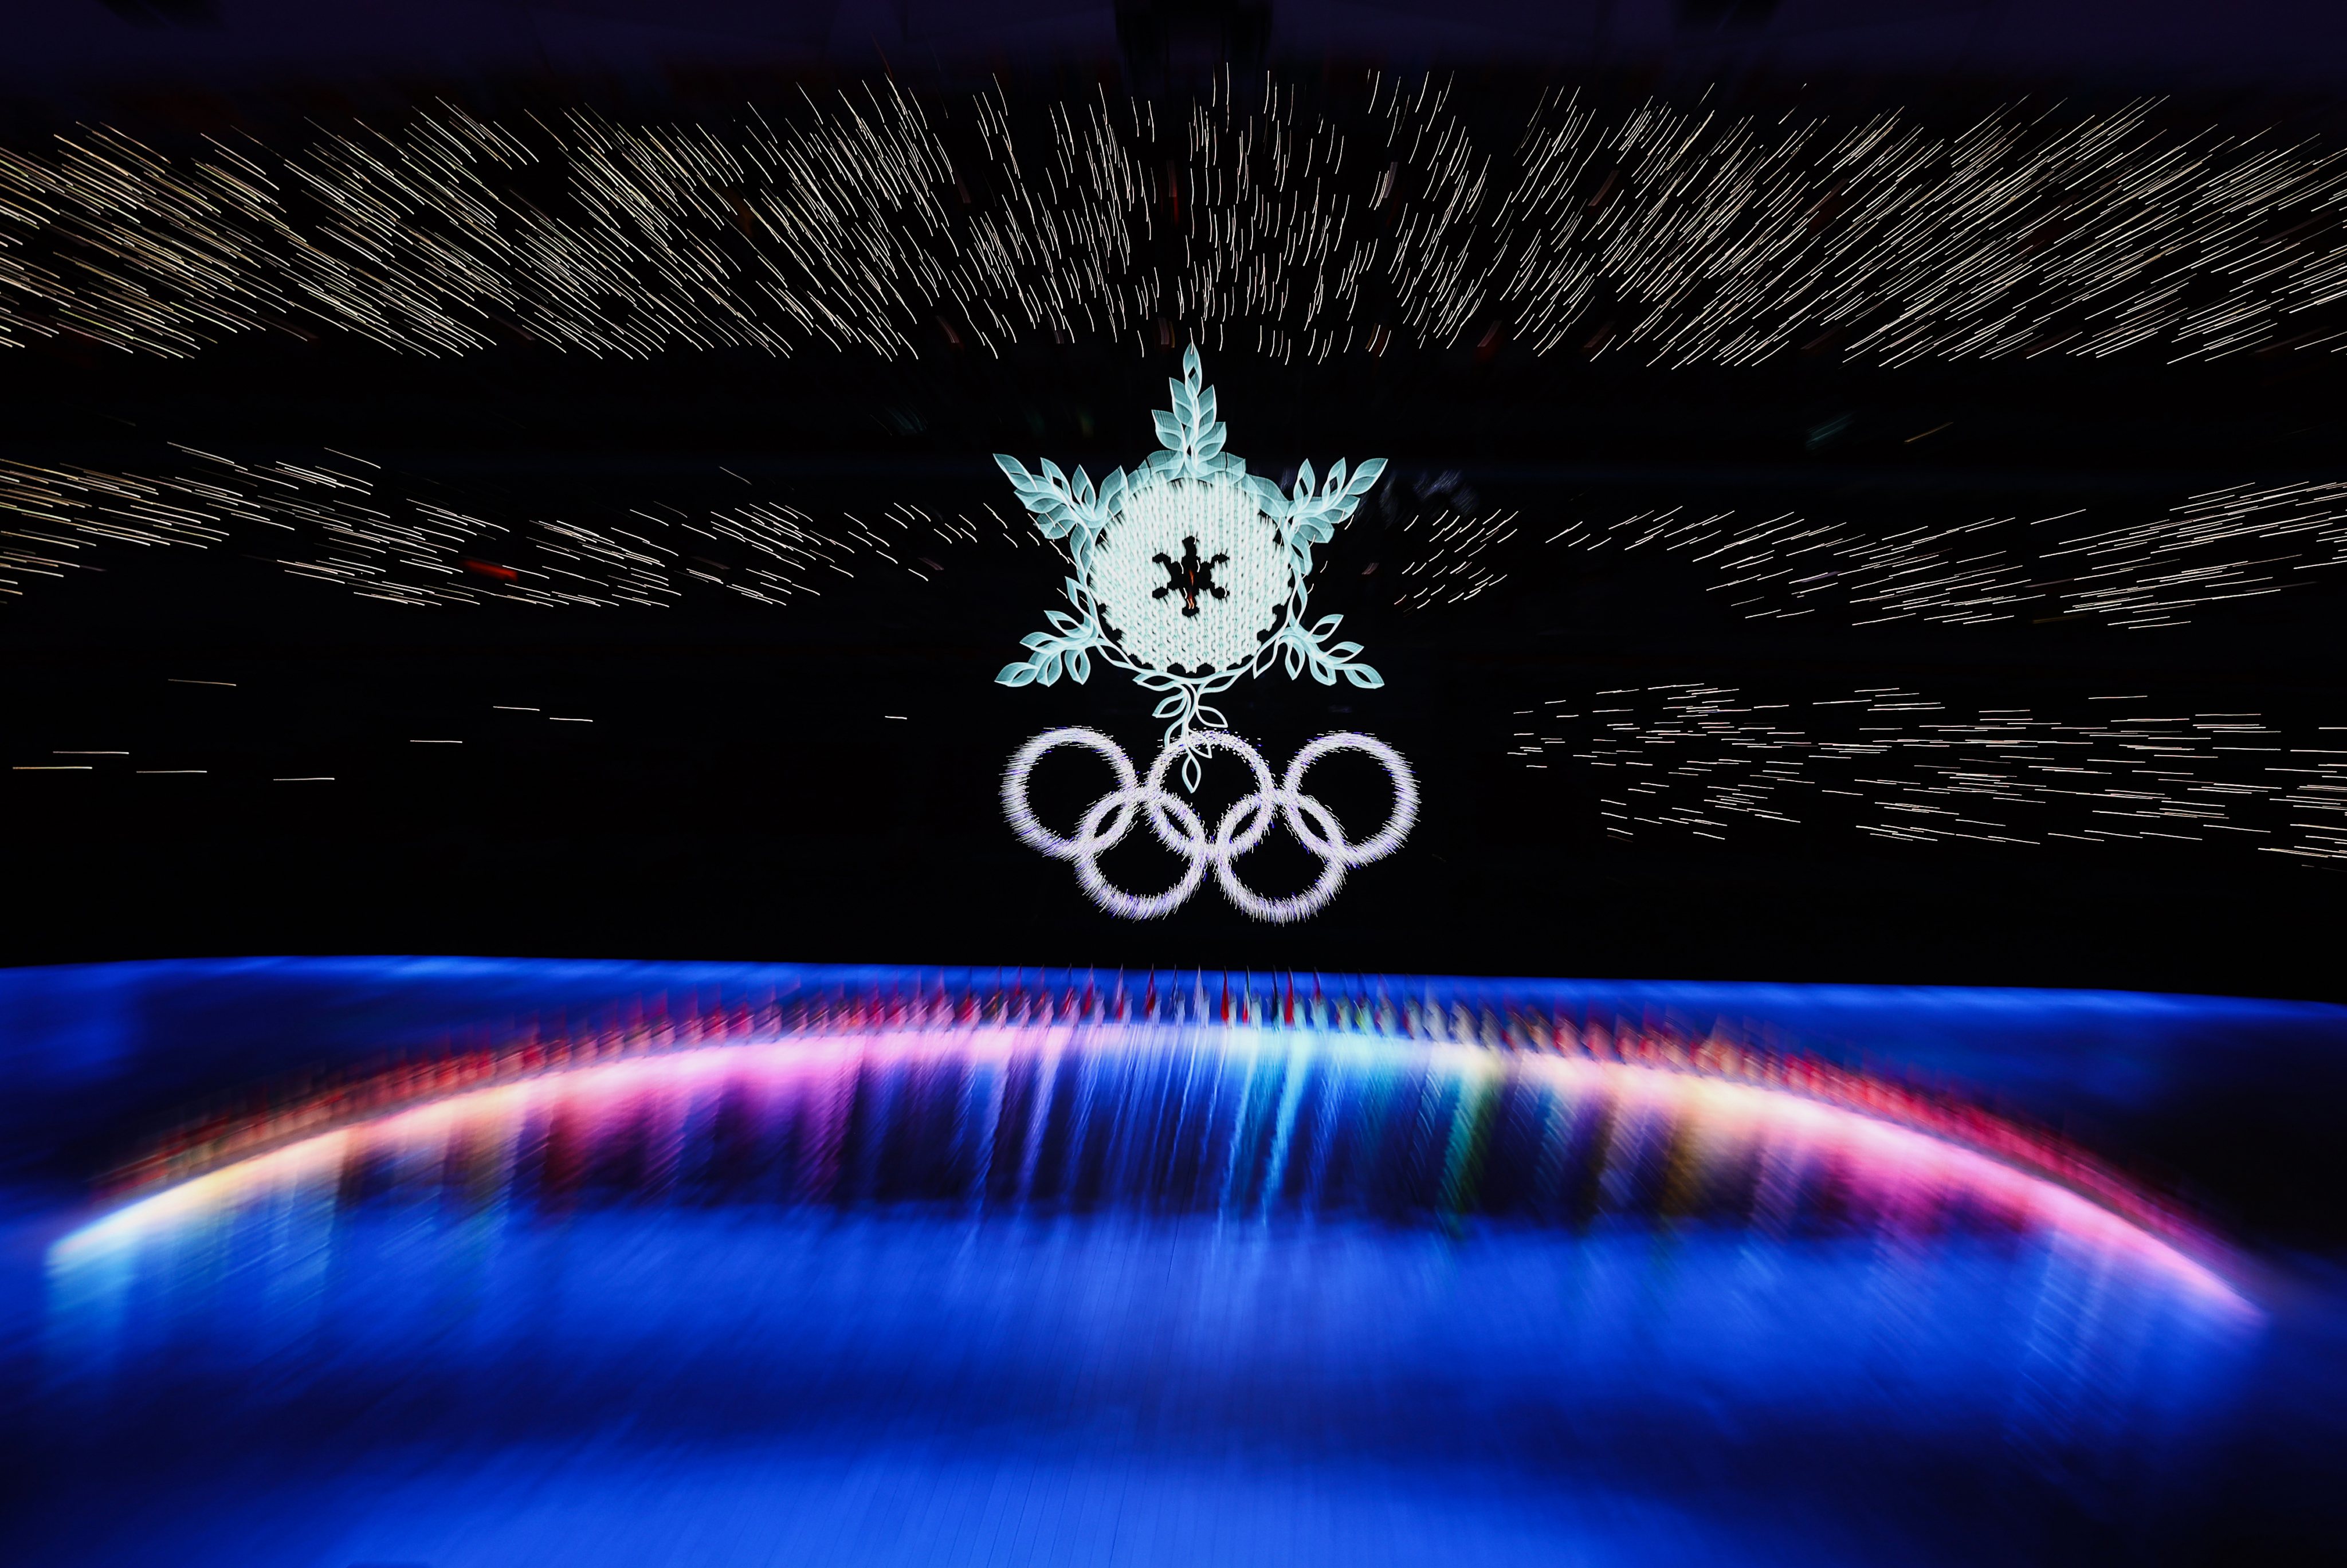 Closing ceremony of Winter Olympic Games in Beijing, China